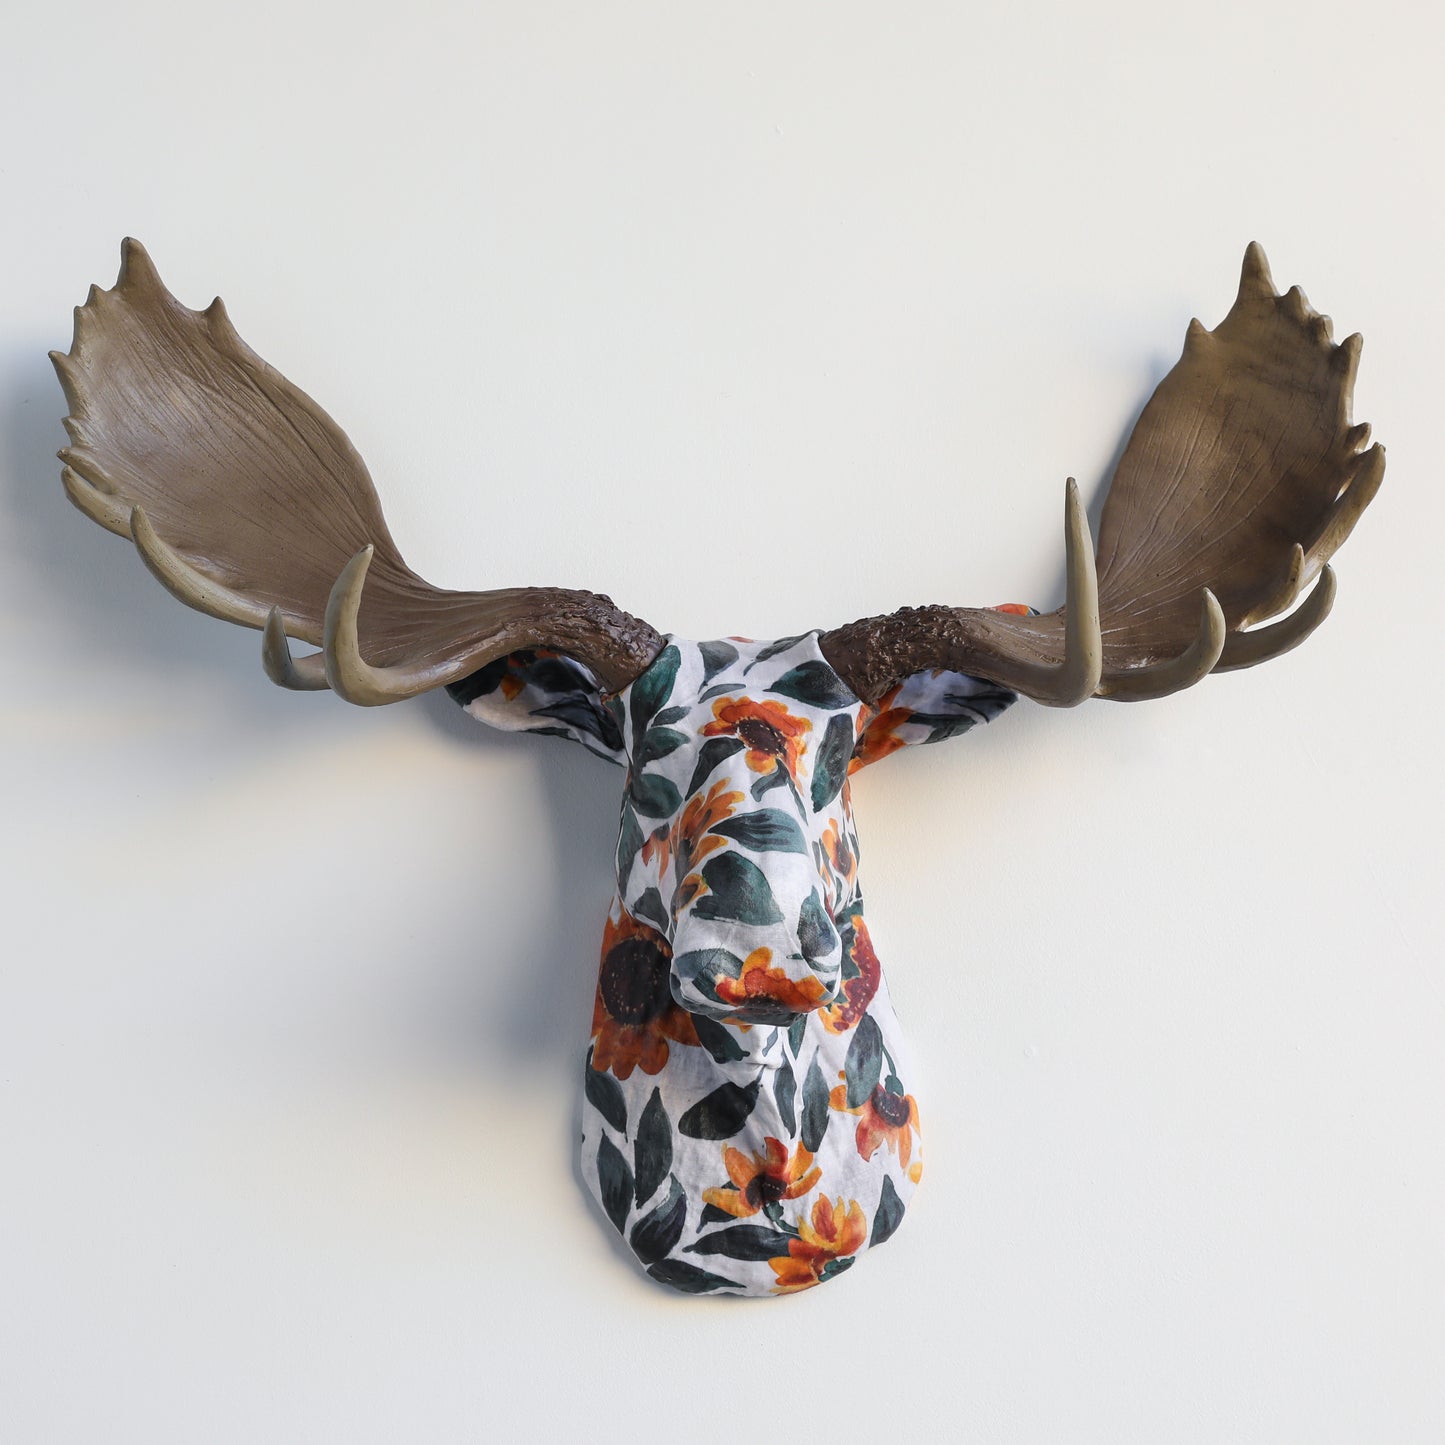 Custom Fabric Moose Head - Choose your Own Fabric and Antler Color